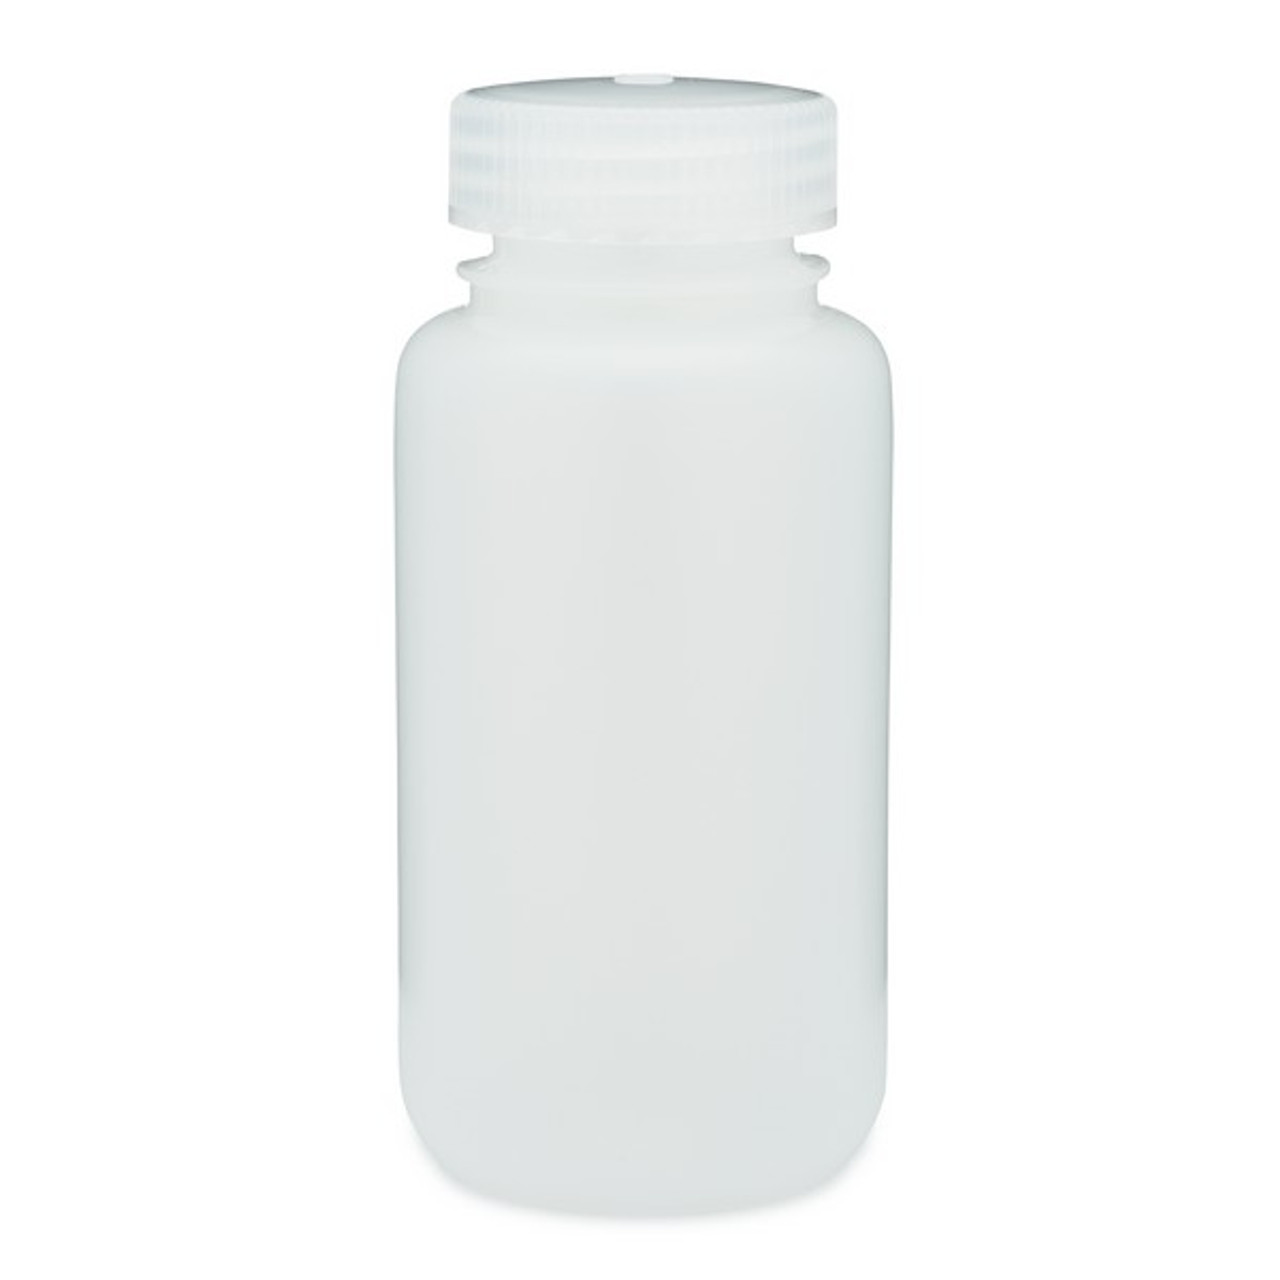 Thermo Scientific - 332189-0008 - Bulk-packed Economy Bottle, Wide, HDPE, 250ml